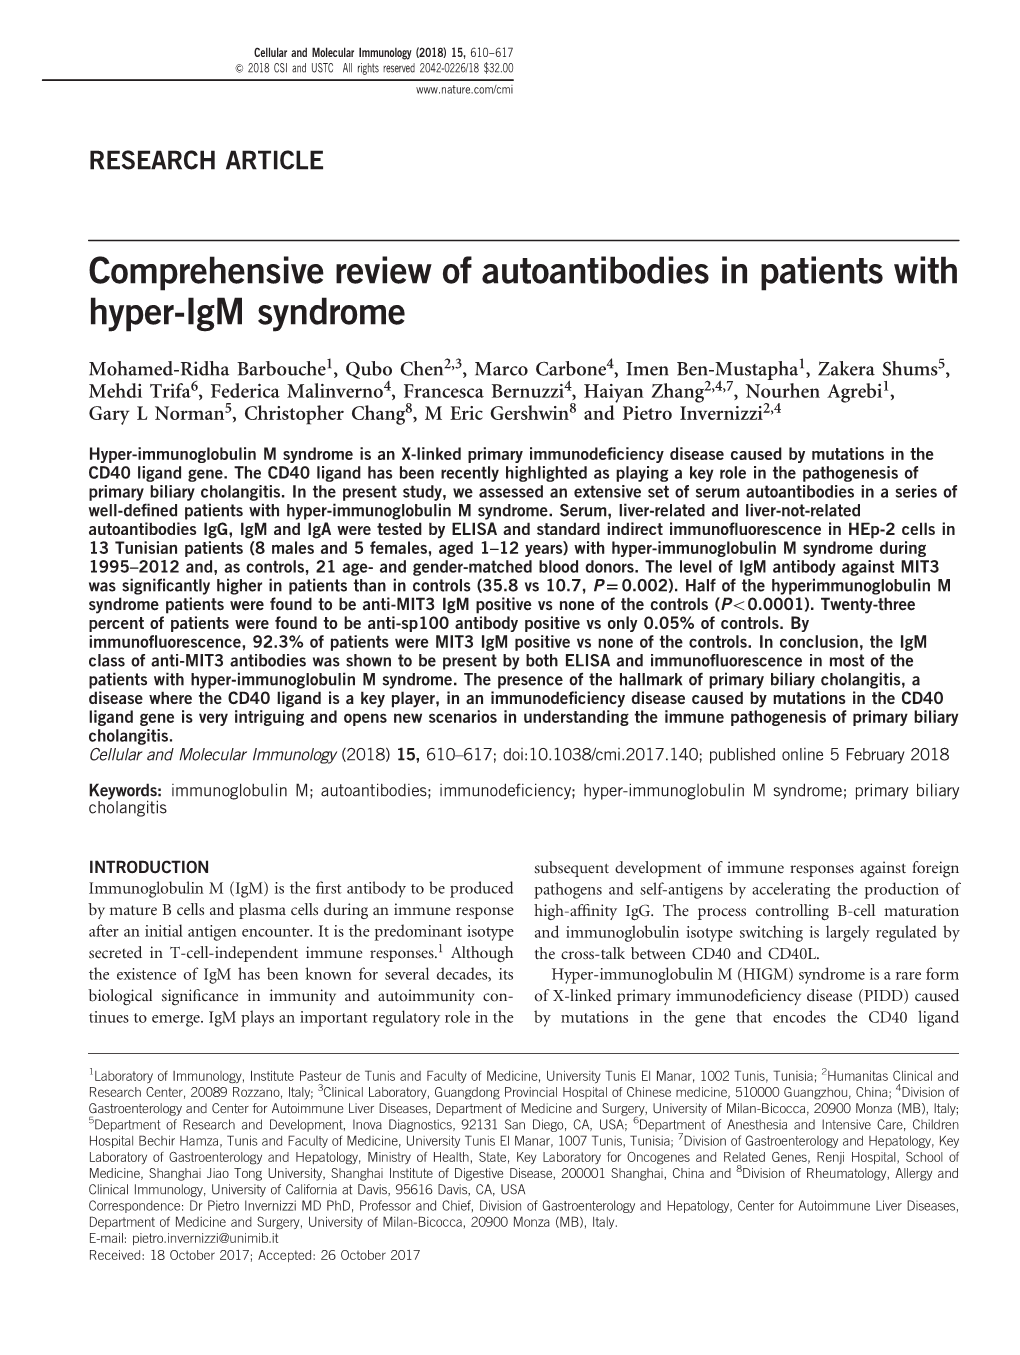 Comprehensive Review of Autoantibodies in Patients with Hyper-Igm Syndrome